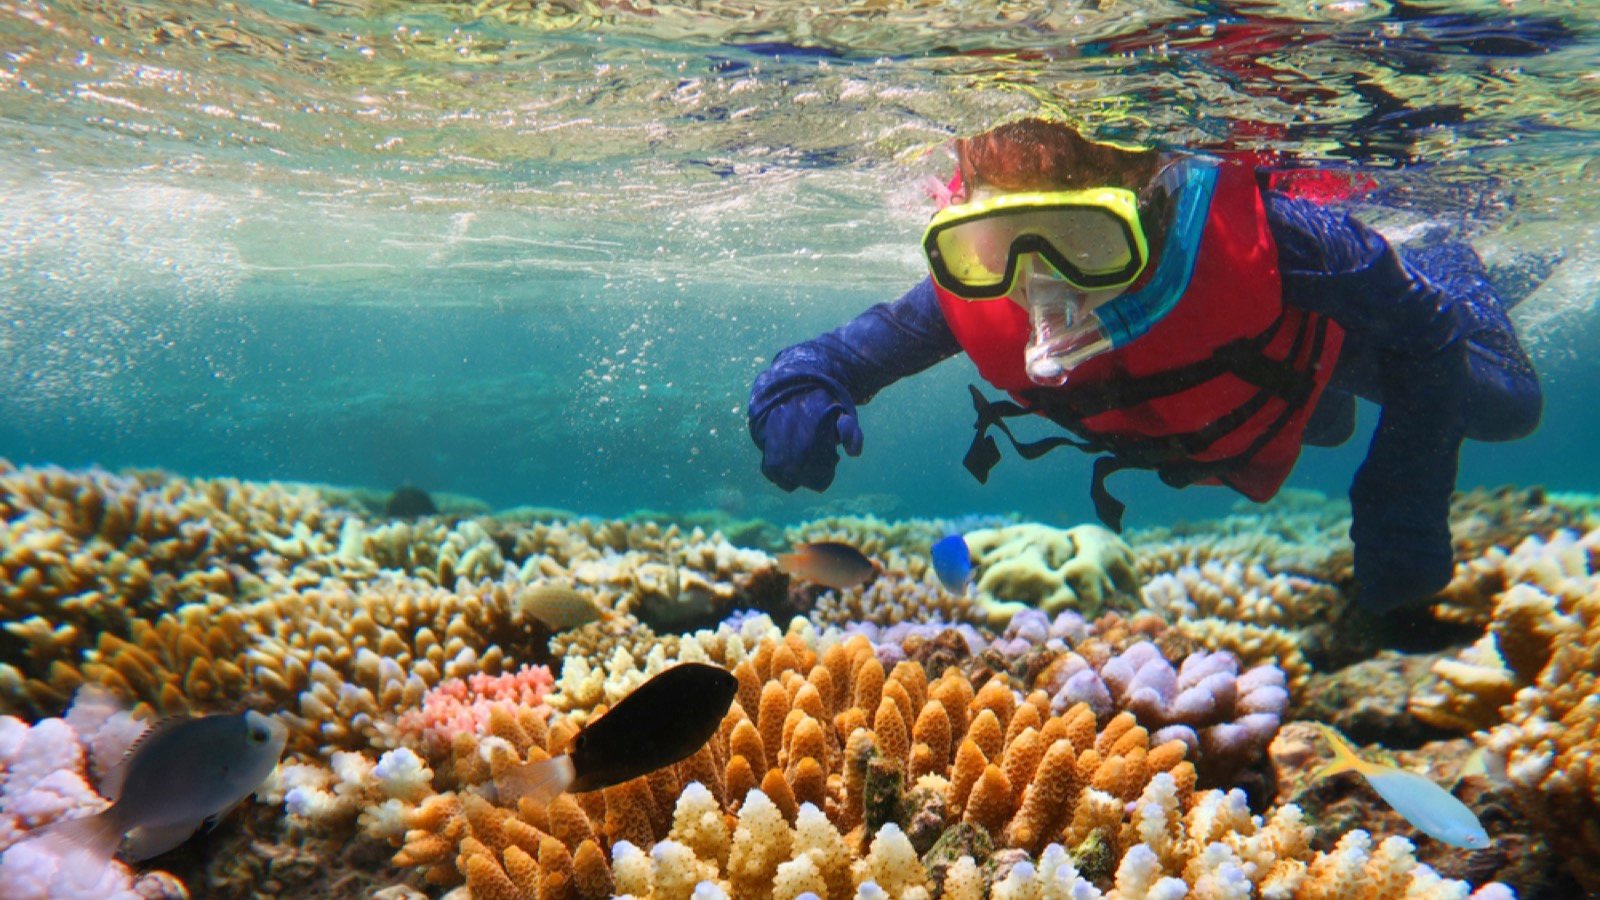 <p>Are you an avid thrill seeker looking to explore life under the sea? One of the highlights of a Caribbean vacation is enjoying the sights that live under the water. Next time you think about spending a week on a cruise or lounging on the beach, check out these spots for breathtaking snorkeling excursions.</p>